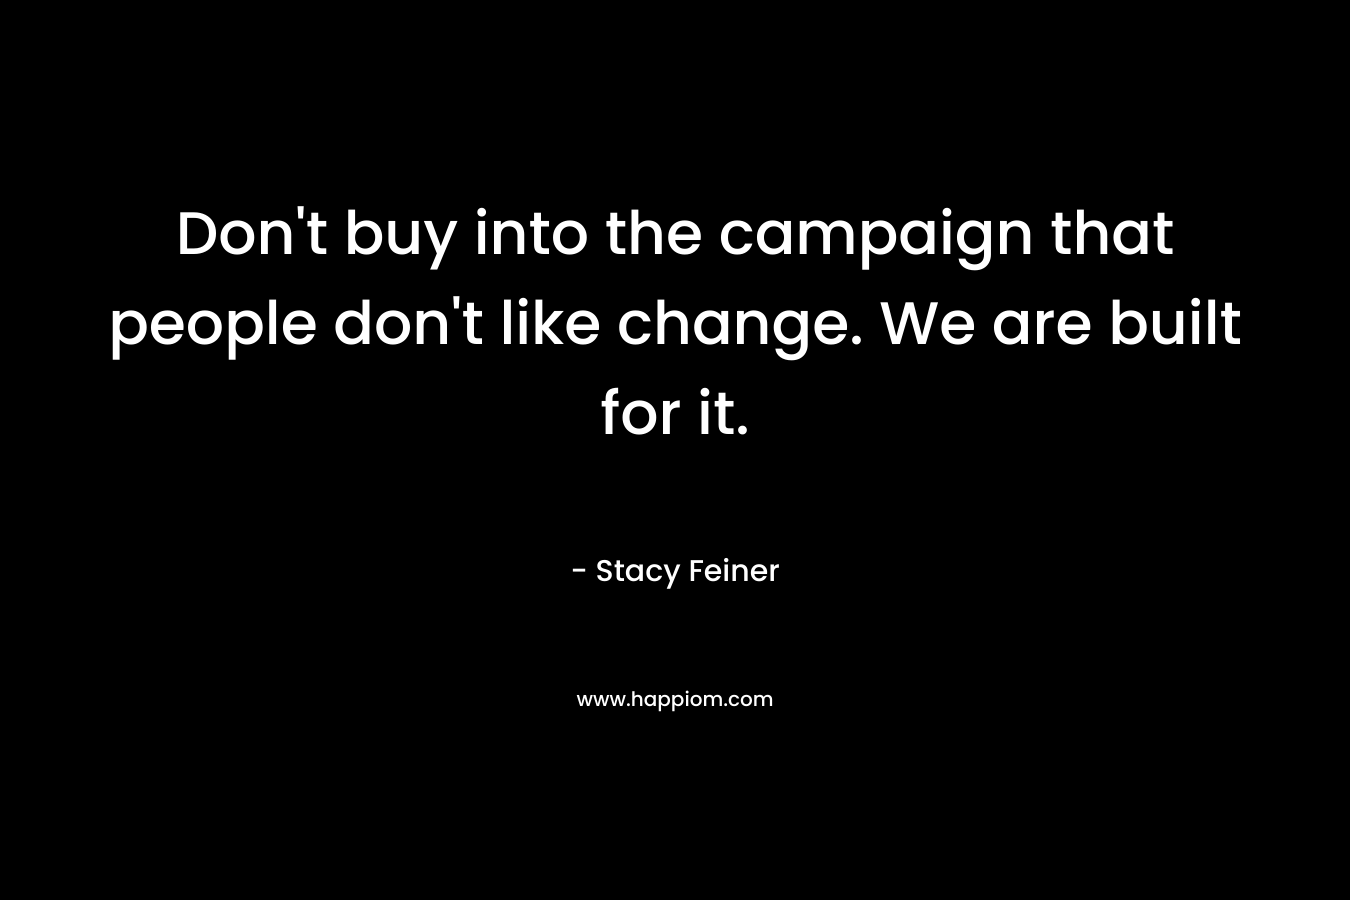 Don't buy into the campaign that people don't like change. We are built for it.